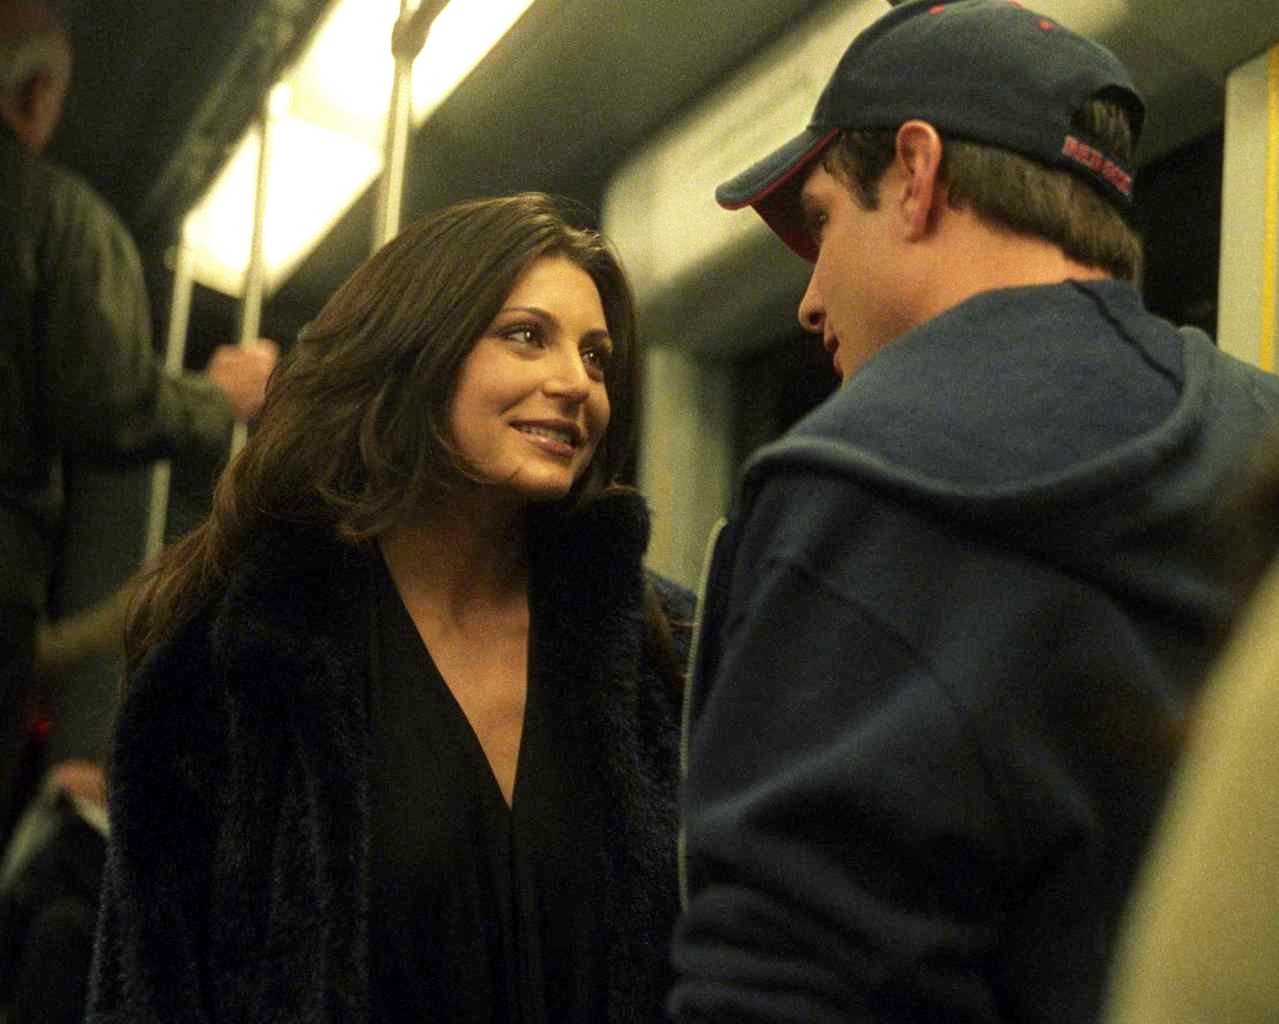 Cerina Vincent stars as Marisa Costa and Jay Jablonski stars as Jake Bianski in Roadside Attractions' Everybody Wants to Be Italian (2008)